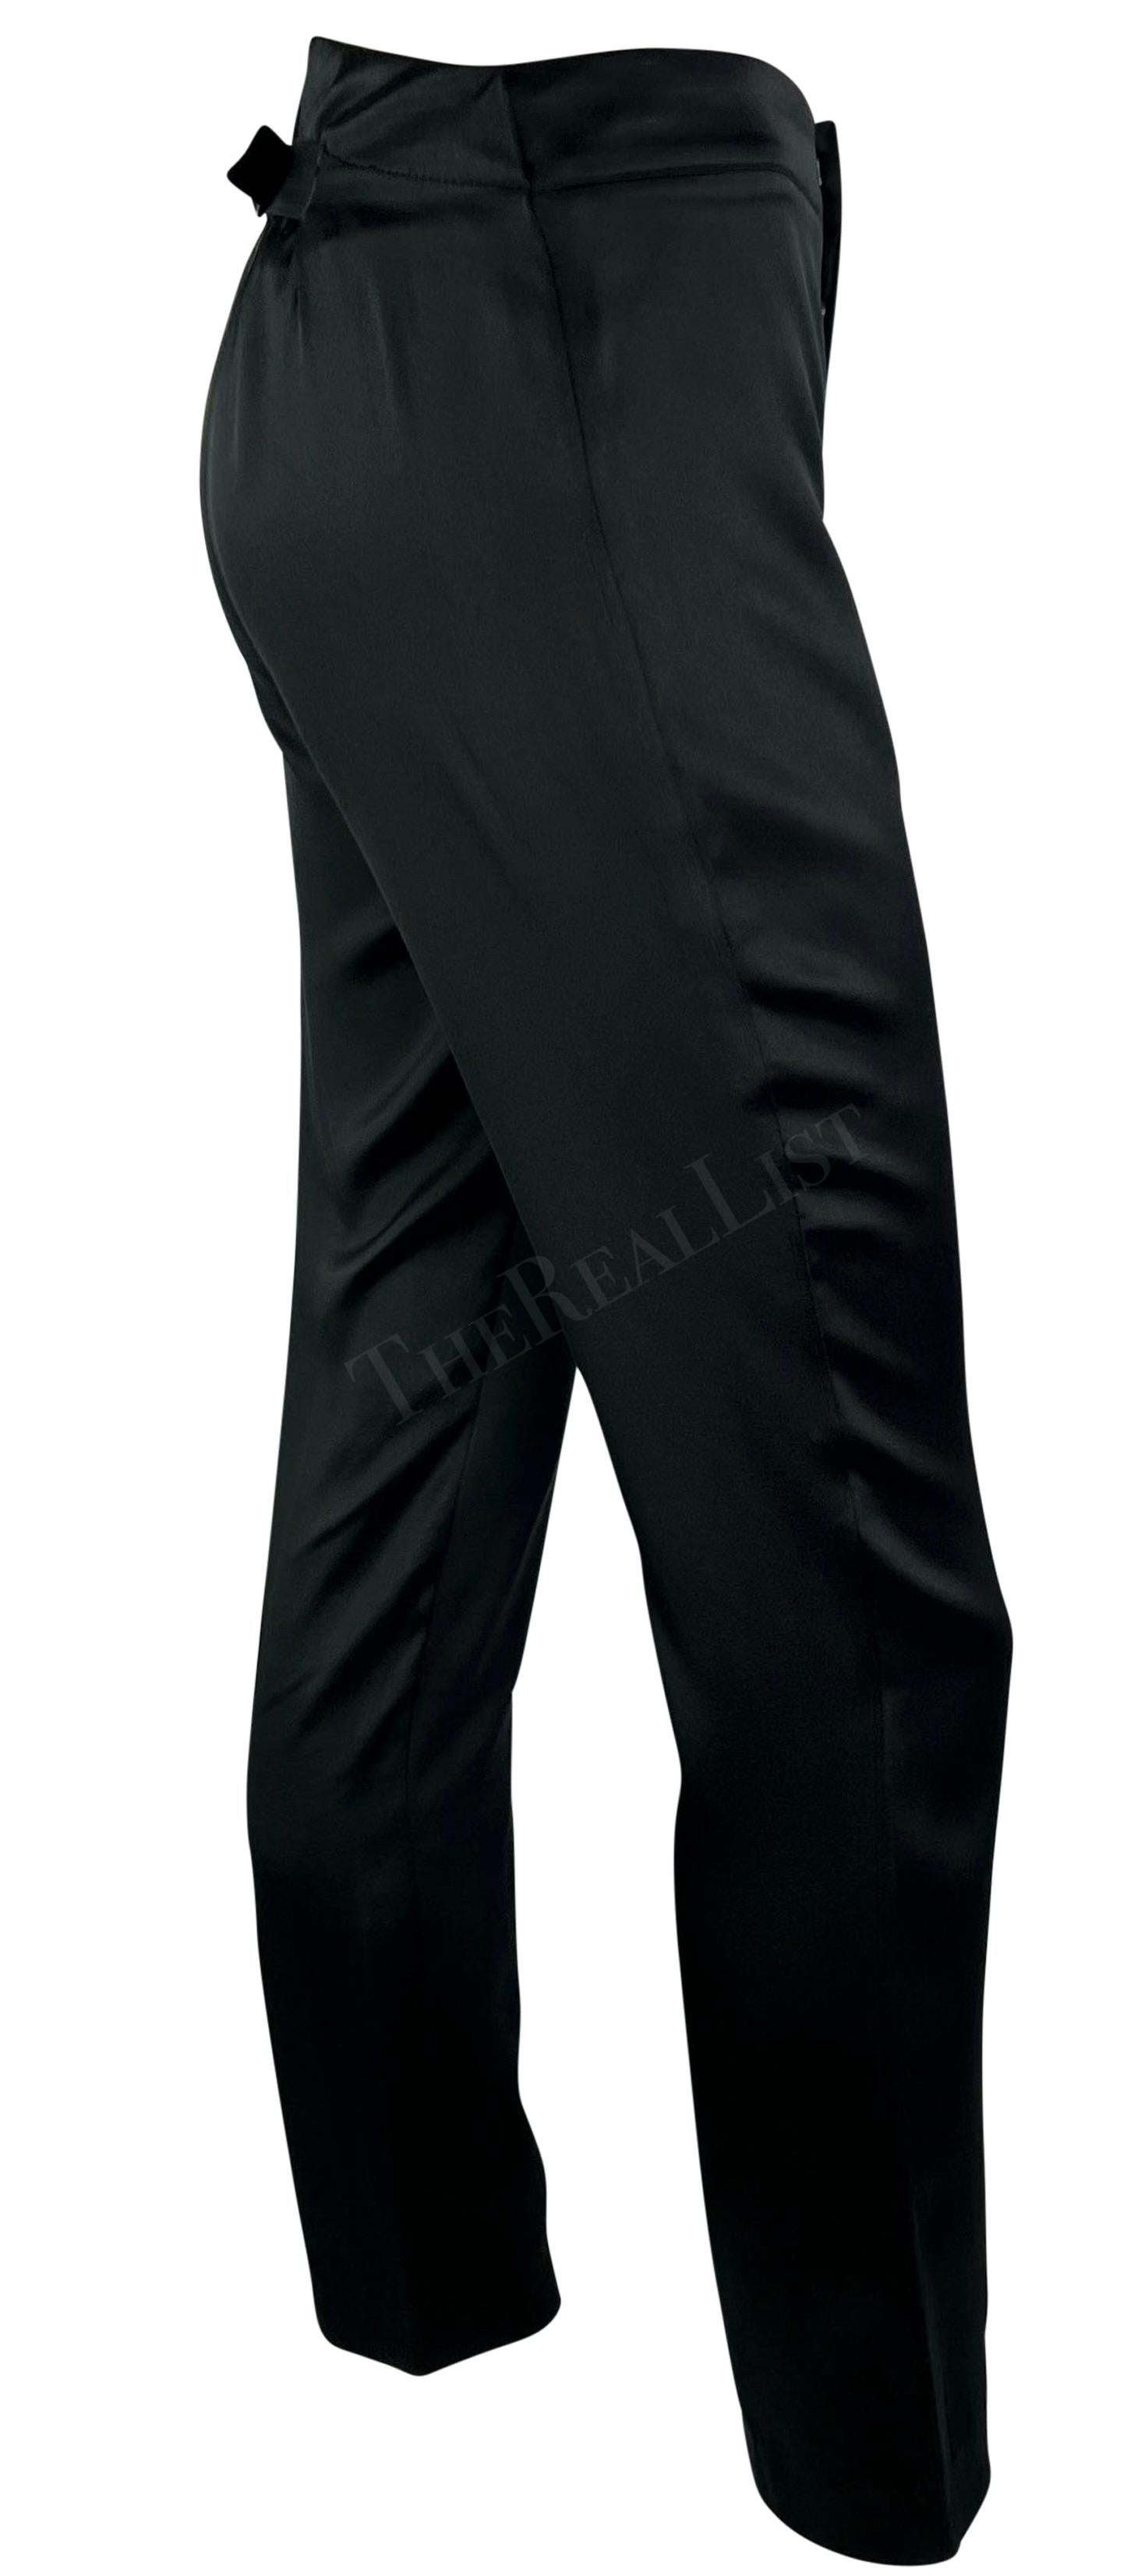 F/W 2002 Gucci by Tom Ford Black Satin Adjustable Buckle Pants In Good Condition For Sale In West Hollywood, CA